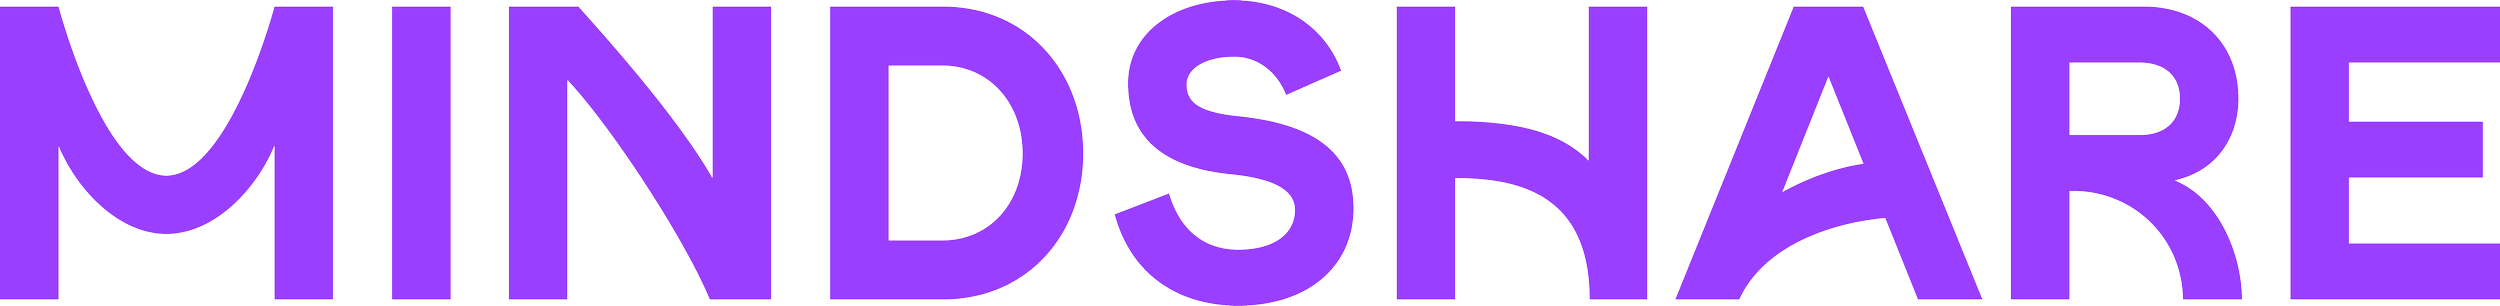 MS_Official_Logo_RGB_Purple (1).png